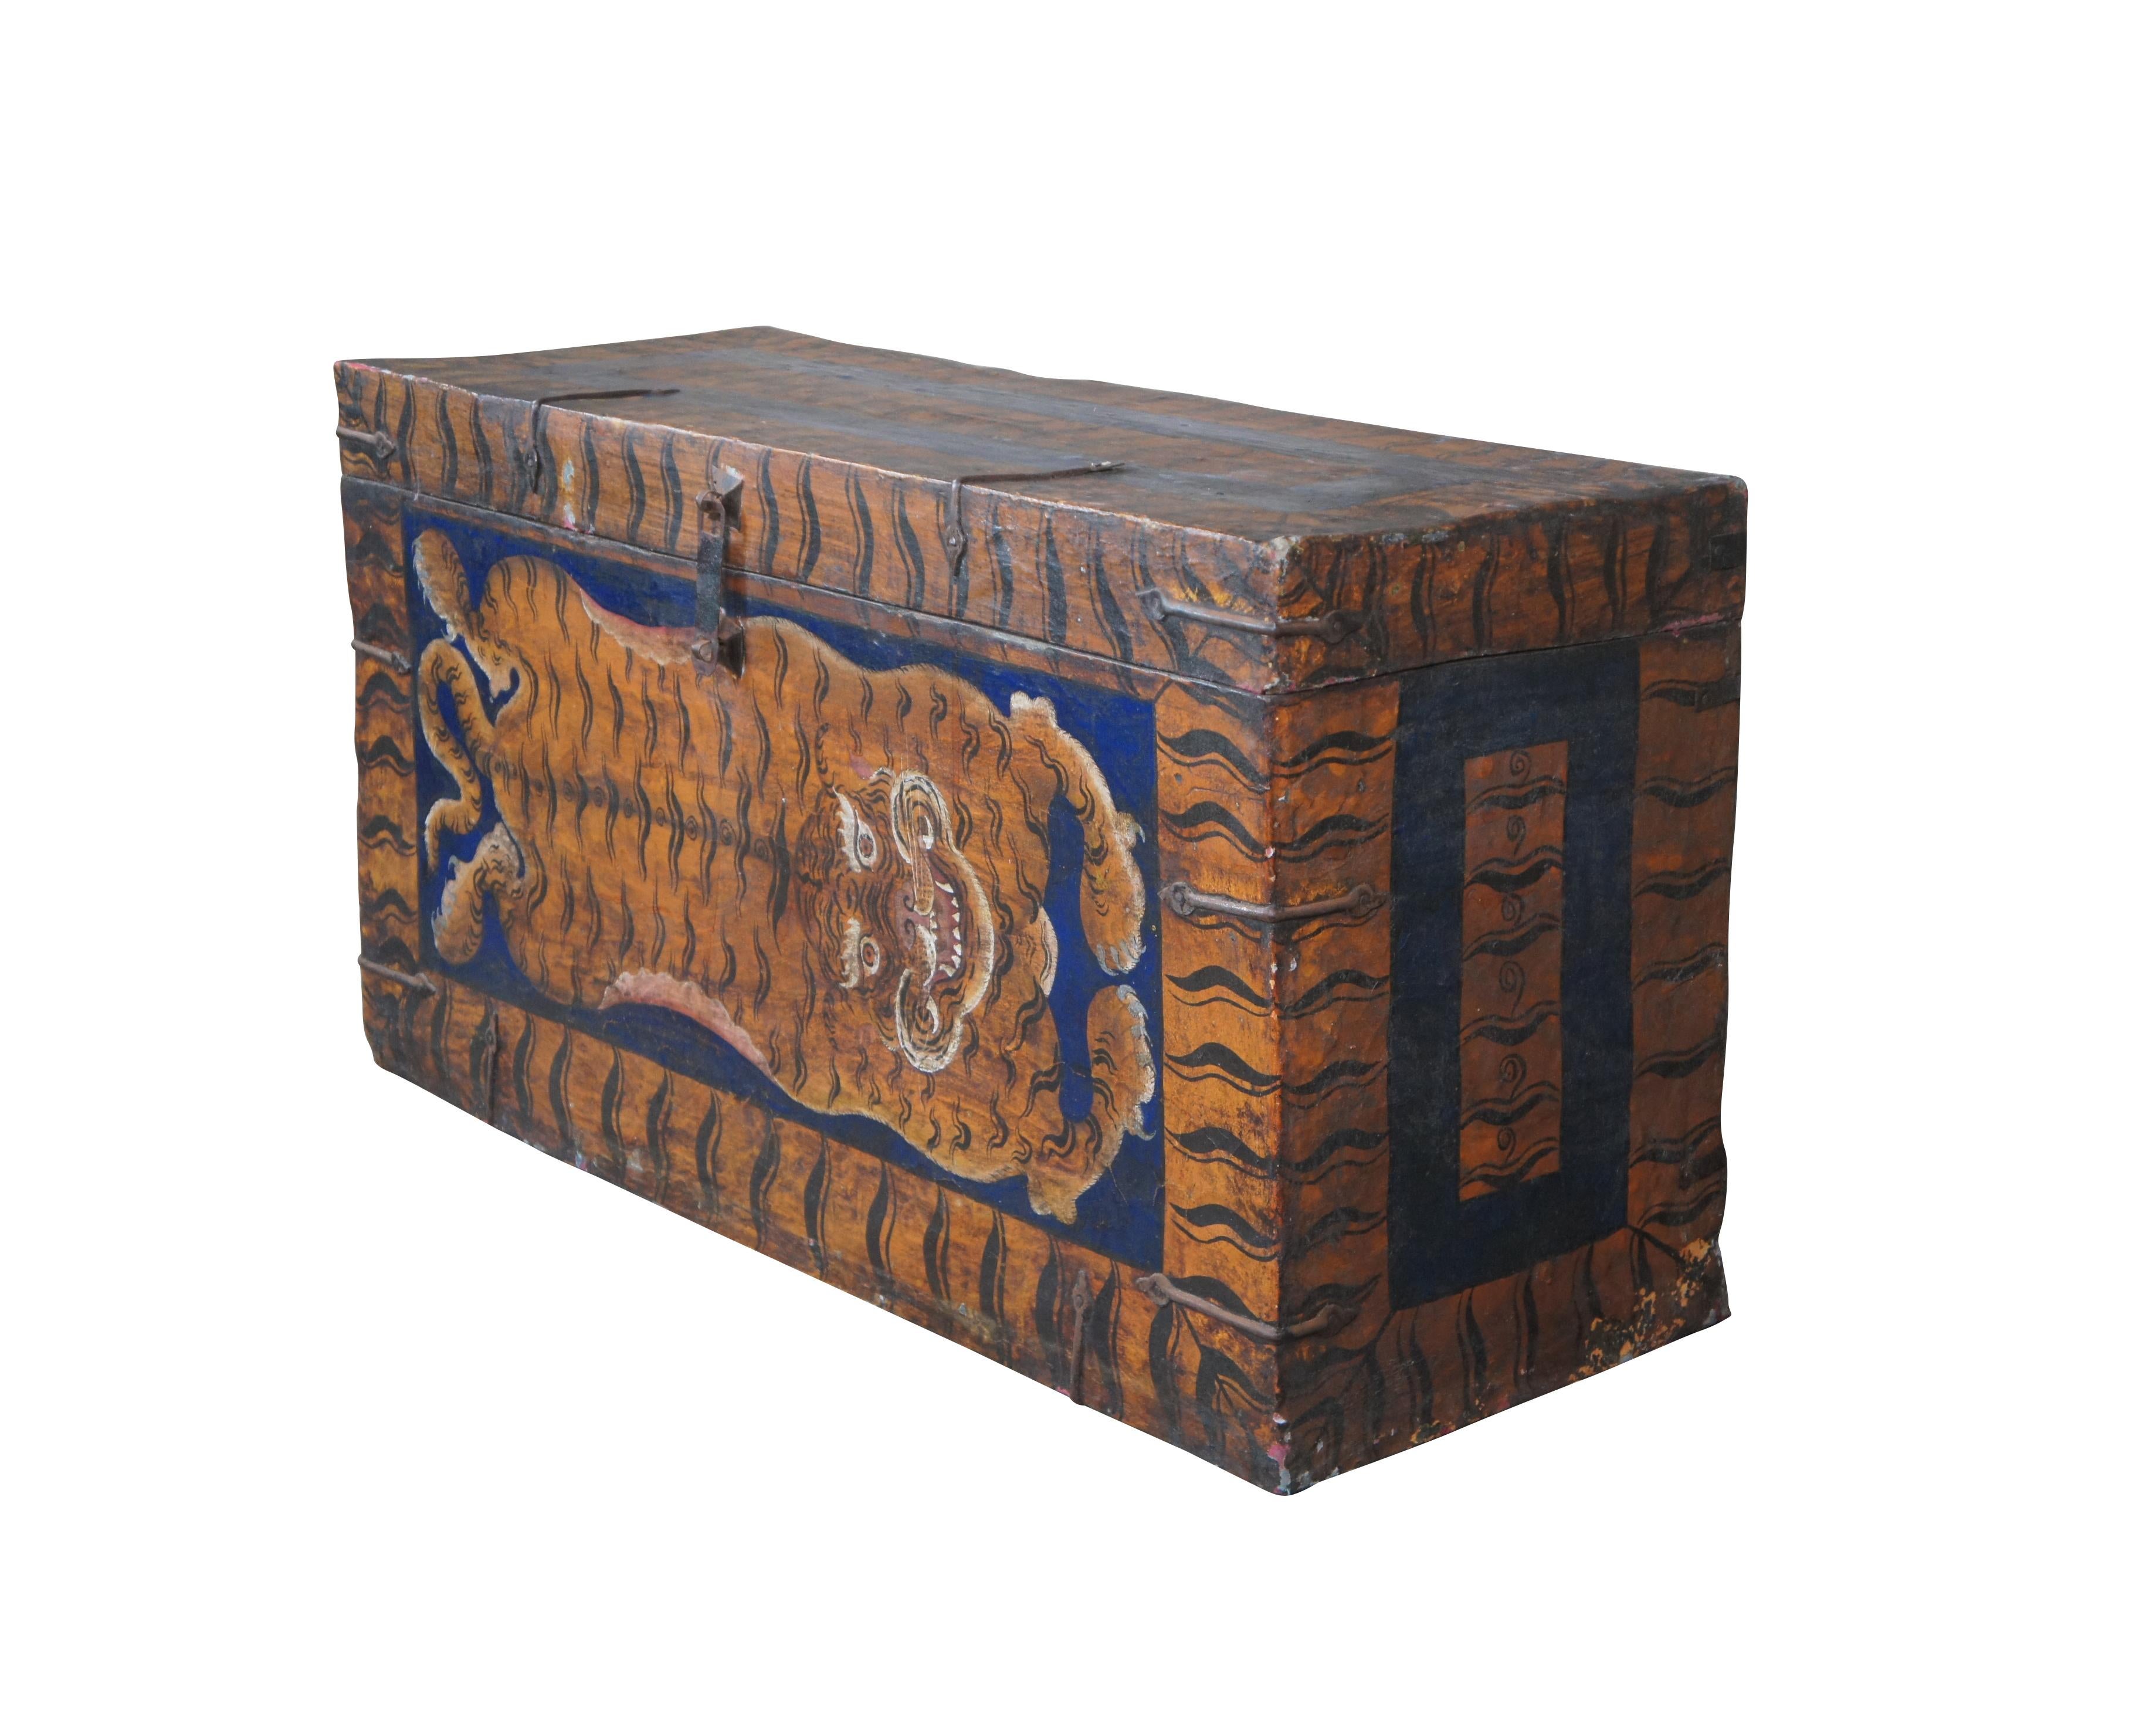 An impressive Tibetan storage from the first quarter of the 20th century. A wooden frame richly finished with lacquered leather hide and banded iron hardware. The front is hand-painted with a tiger at the center and framed in tiger stripes. The